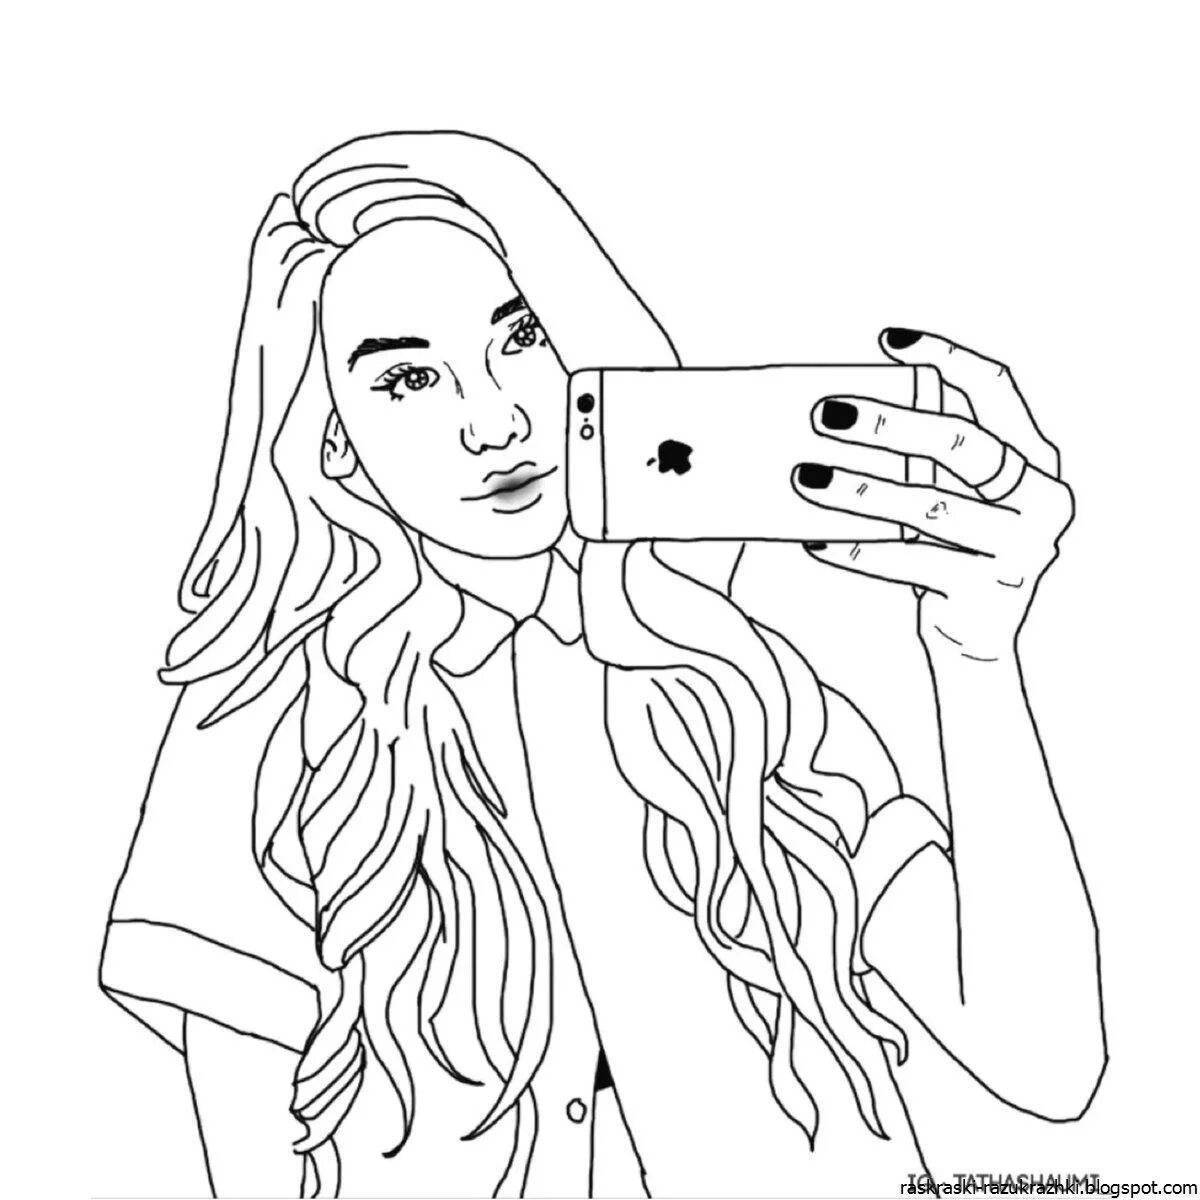 A fascinating coloring book for girls with iPhones